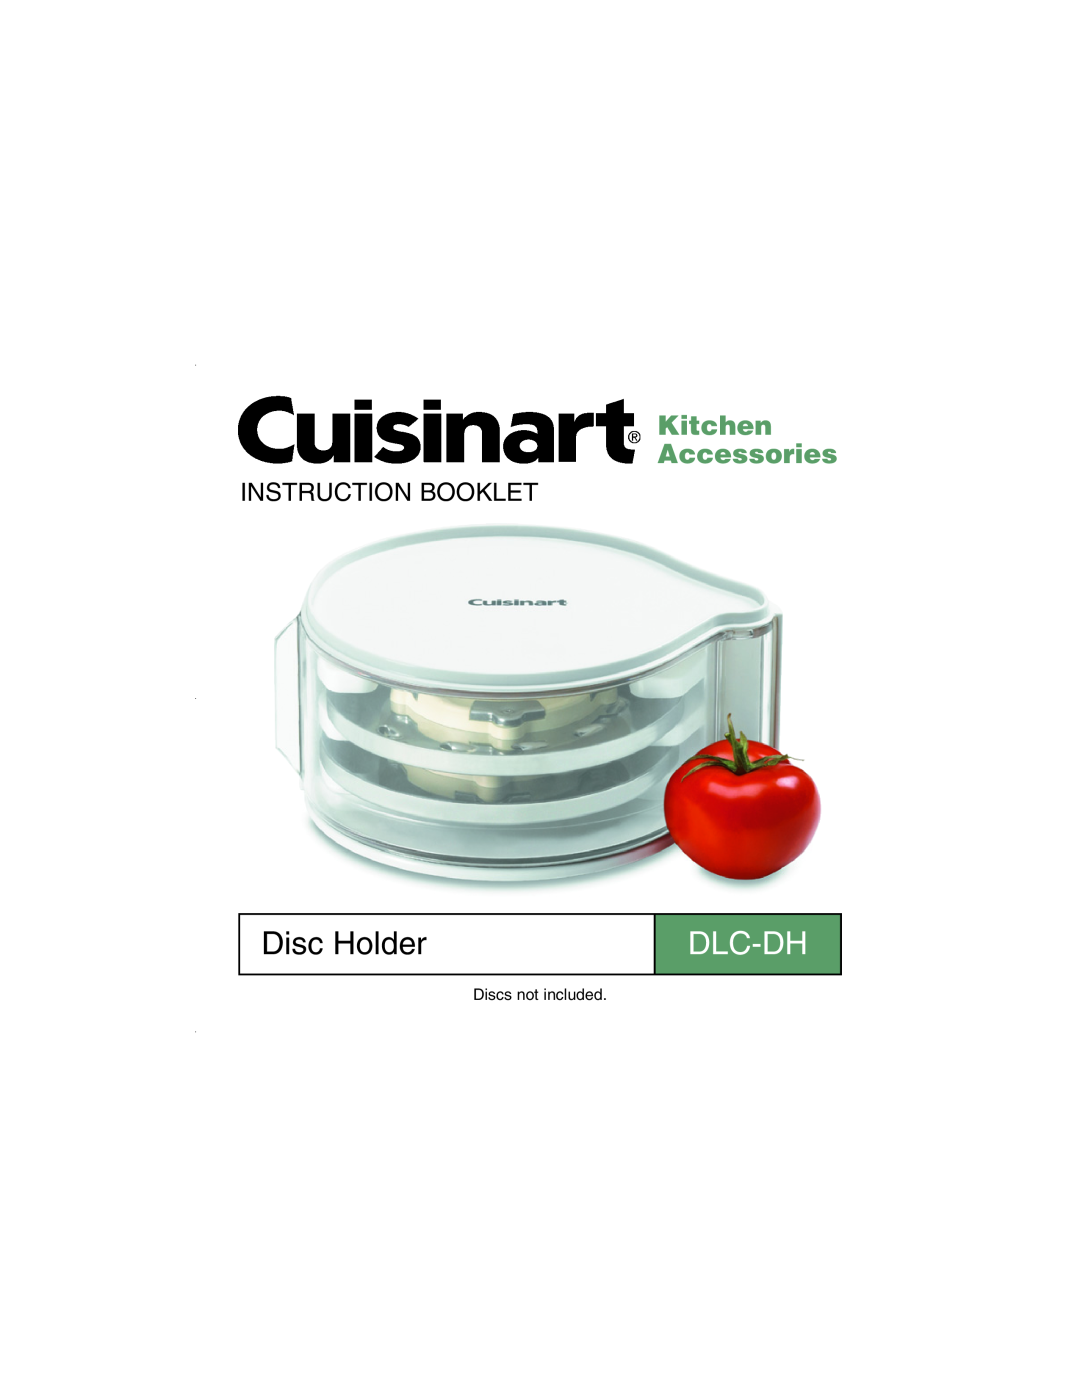 Cuisinart DLC-DH manual Disc Holder, Dlc-Dh, Kitchen Accessories, Instruction Booklet, Discs not included 